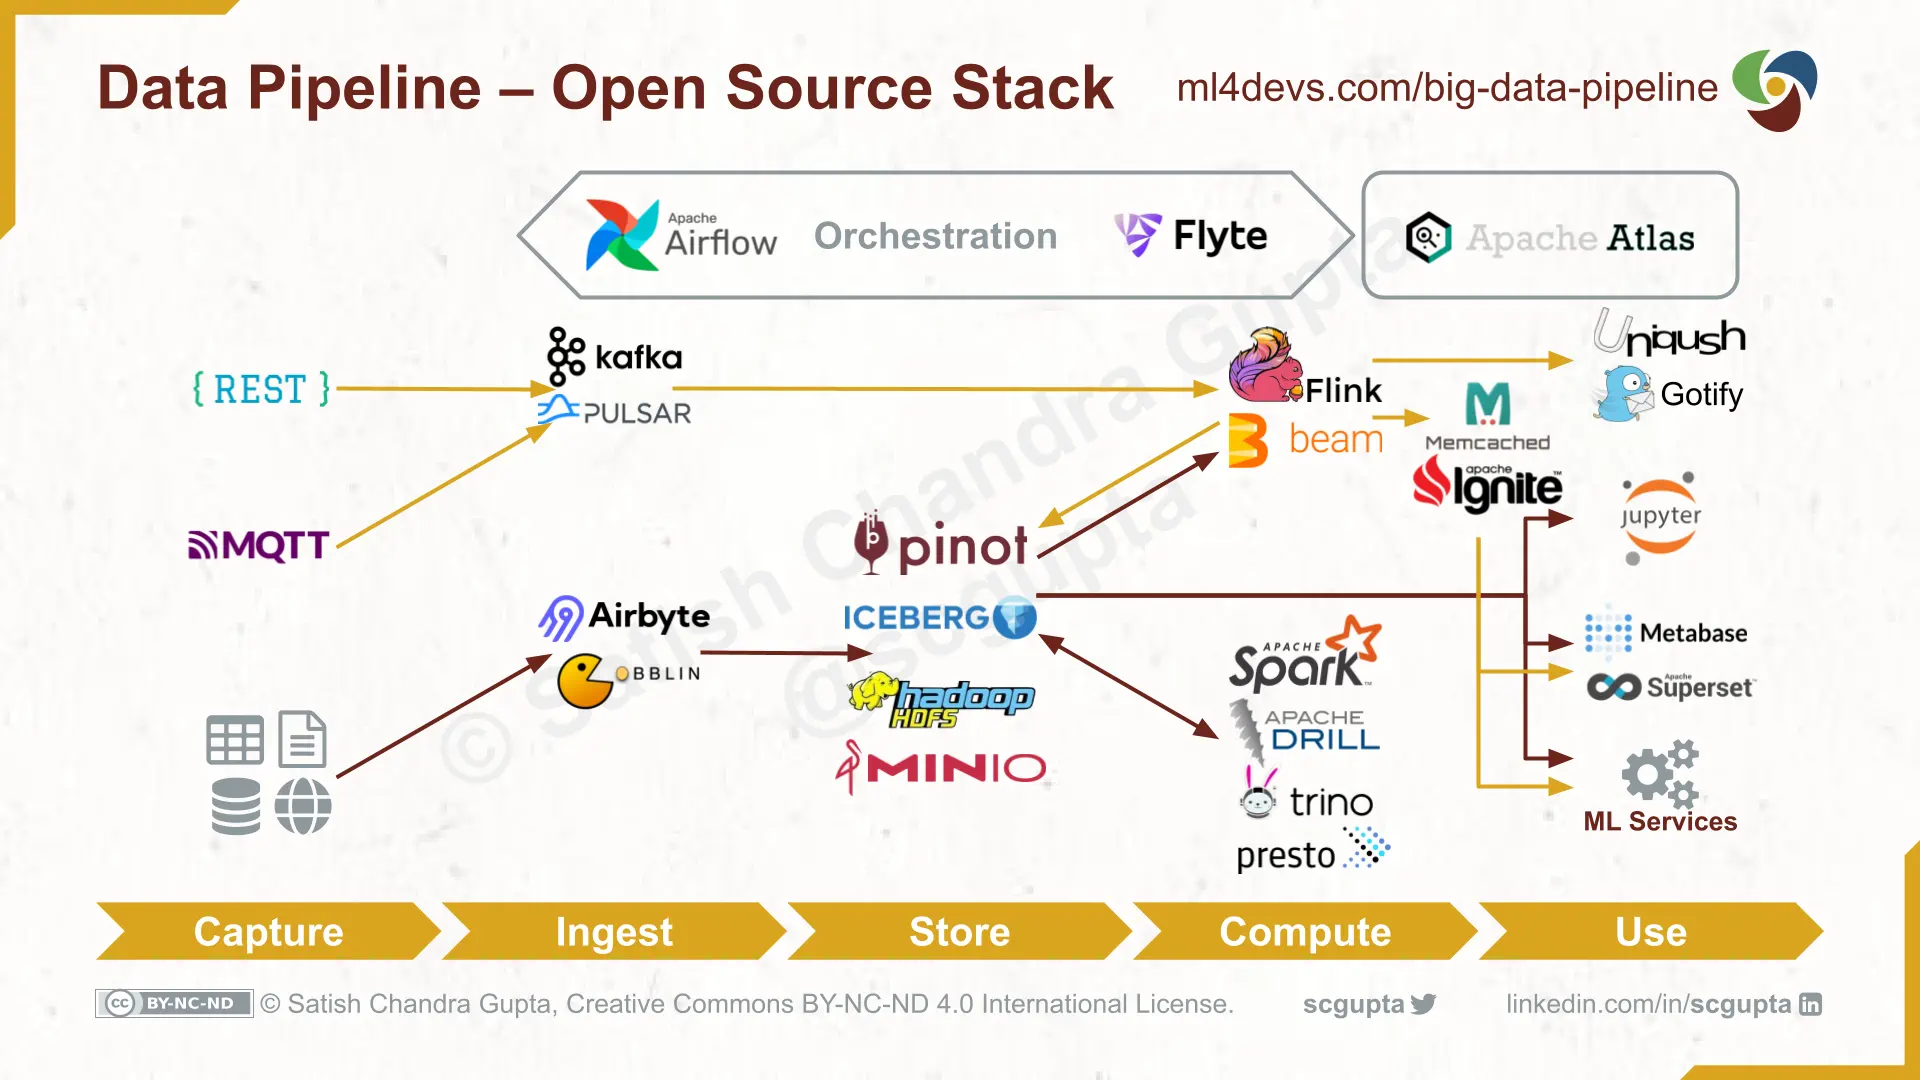 Building data processing using open source technologies